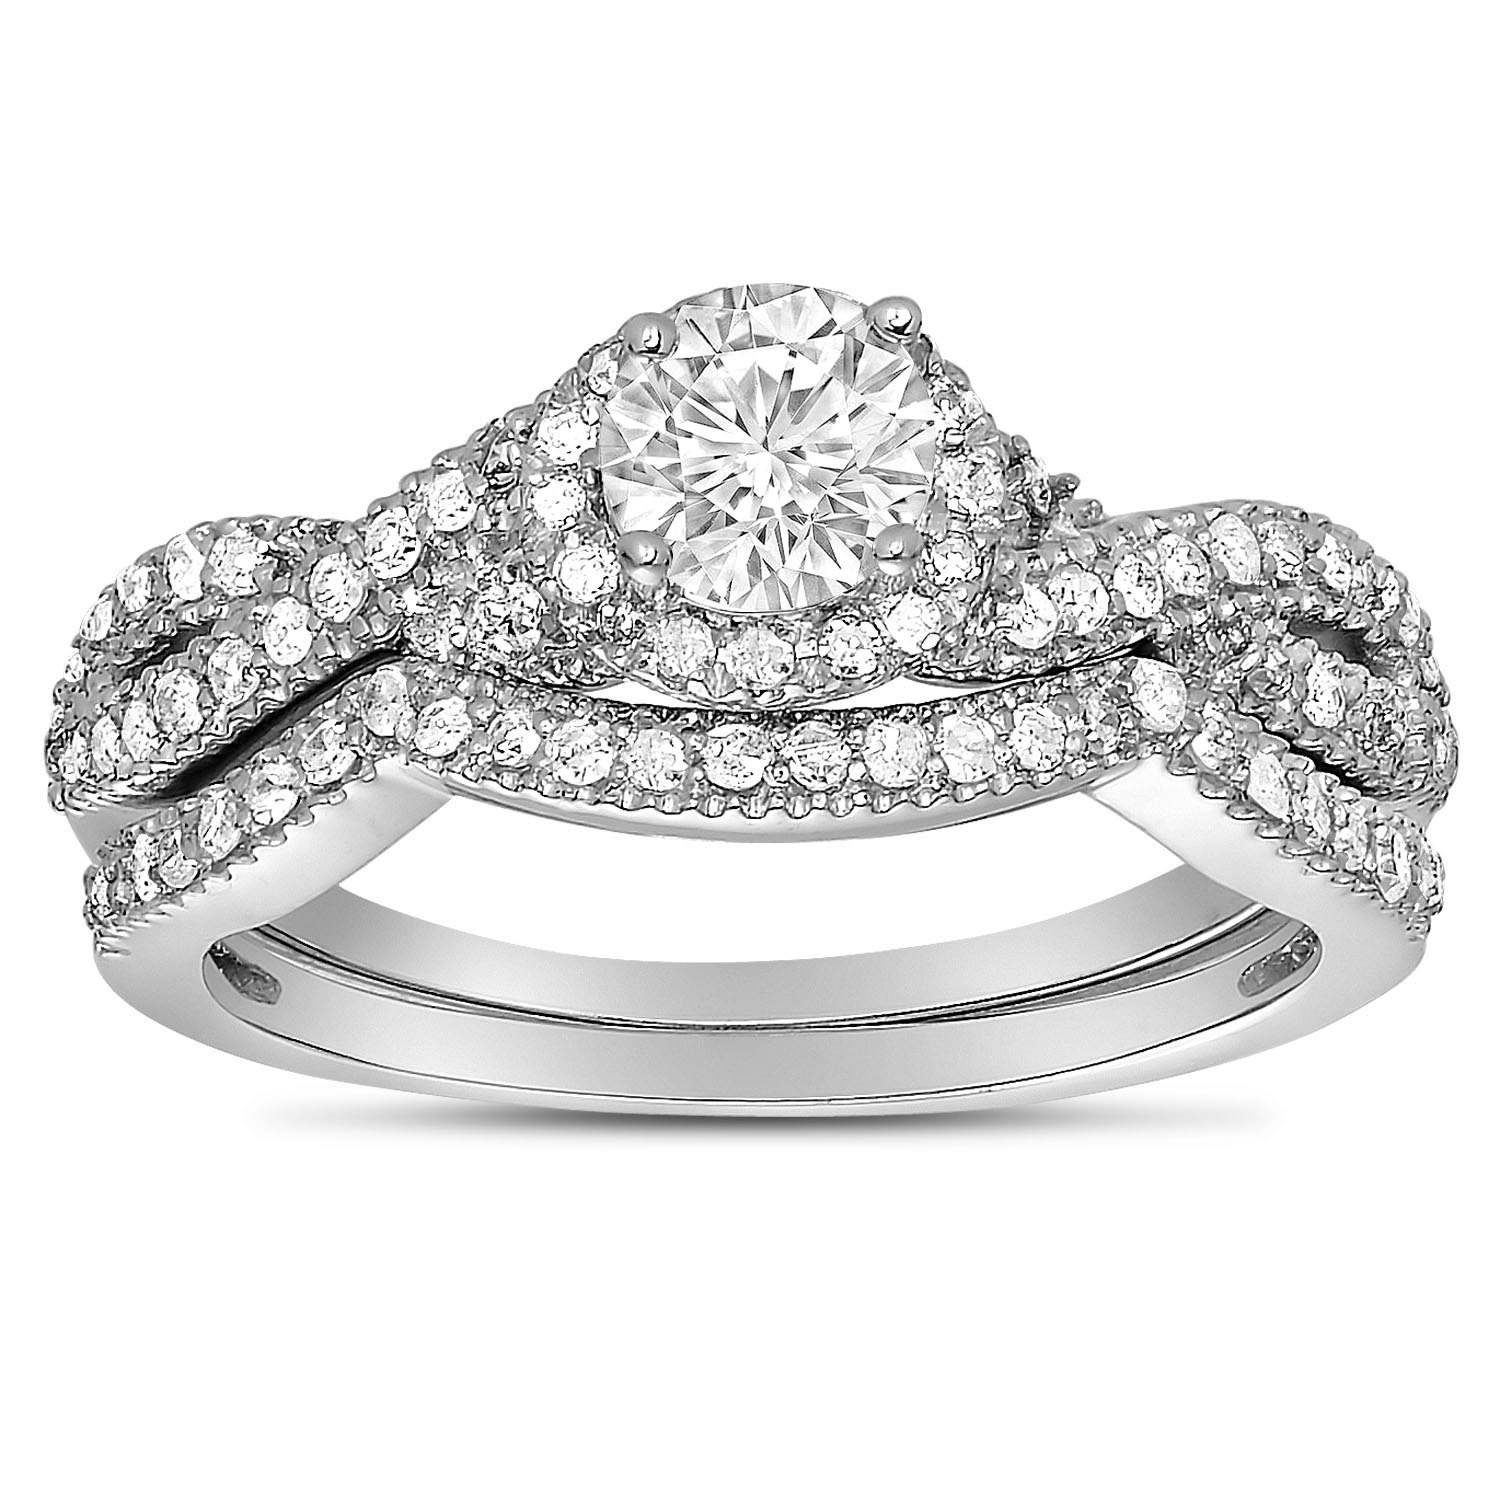 2 Carat Round Diamond Infinity Wedding Ring Set In White Gold For Her 